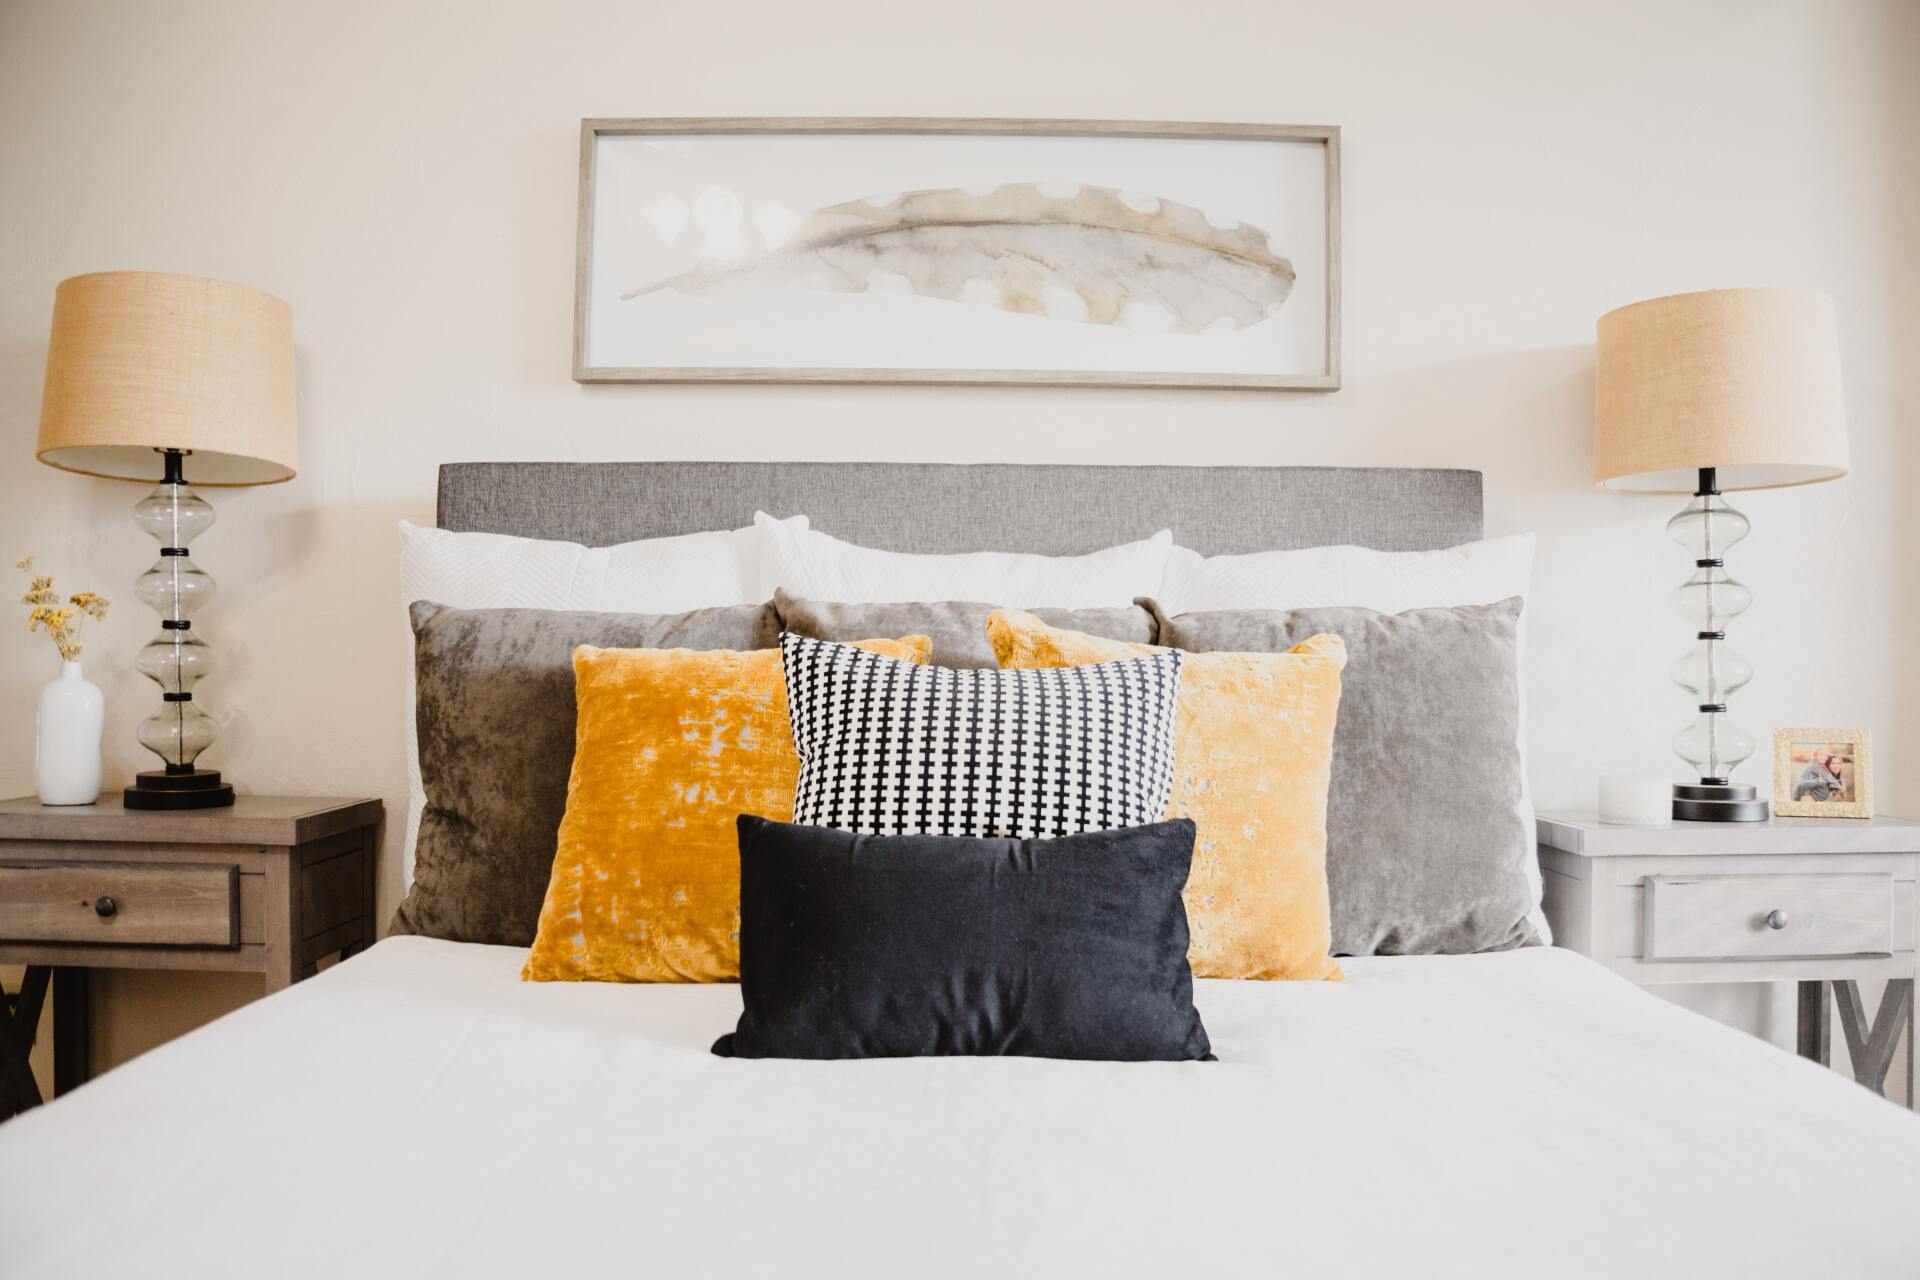 Bed with white sheets, a grey headboard, and colorful pillows on top. The bed is flanked with two lamps